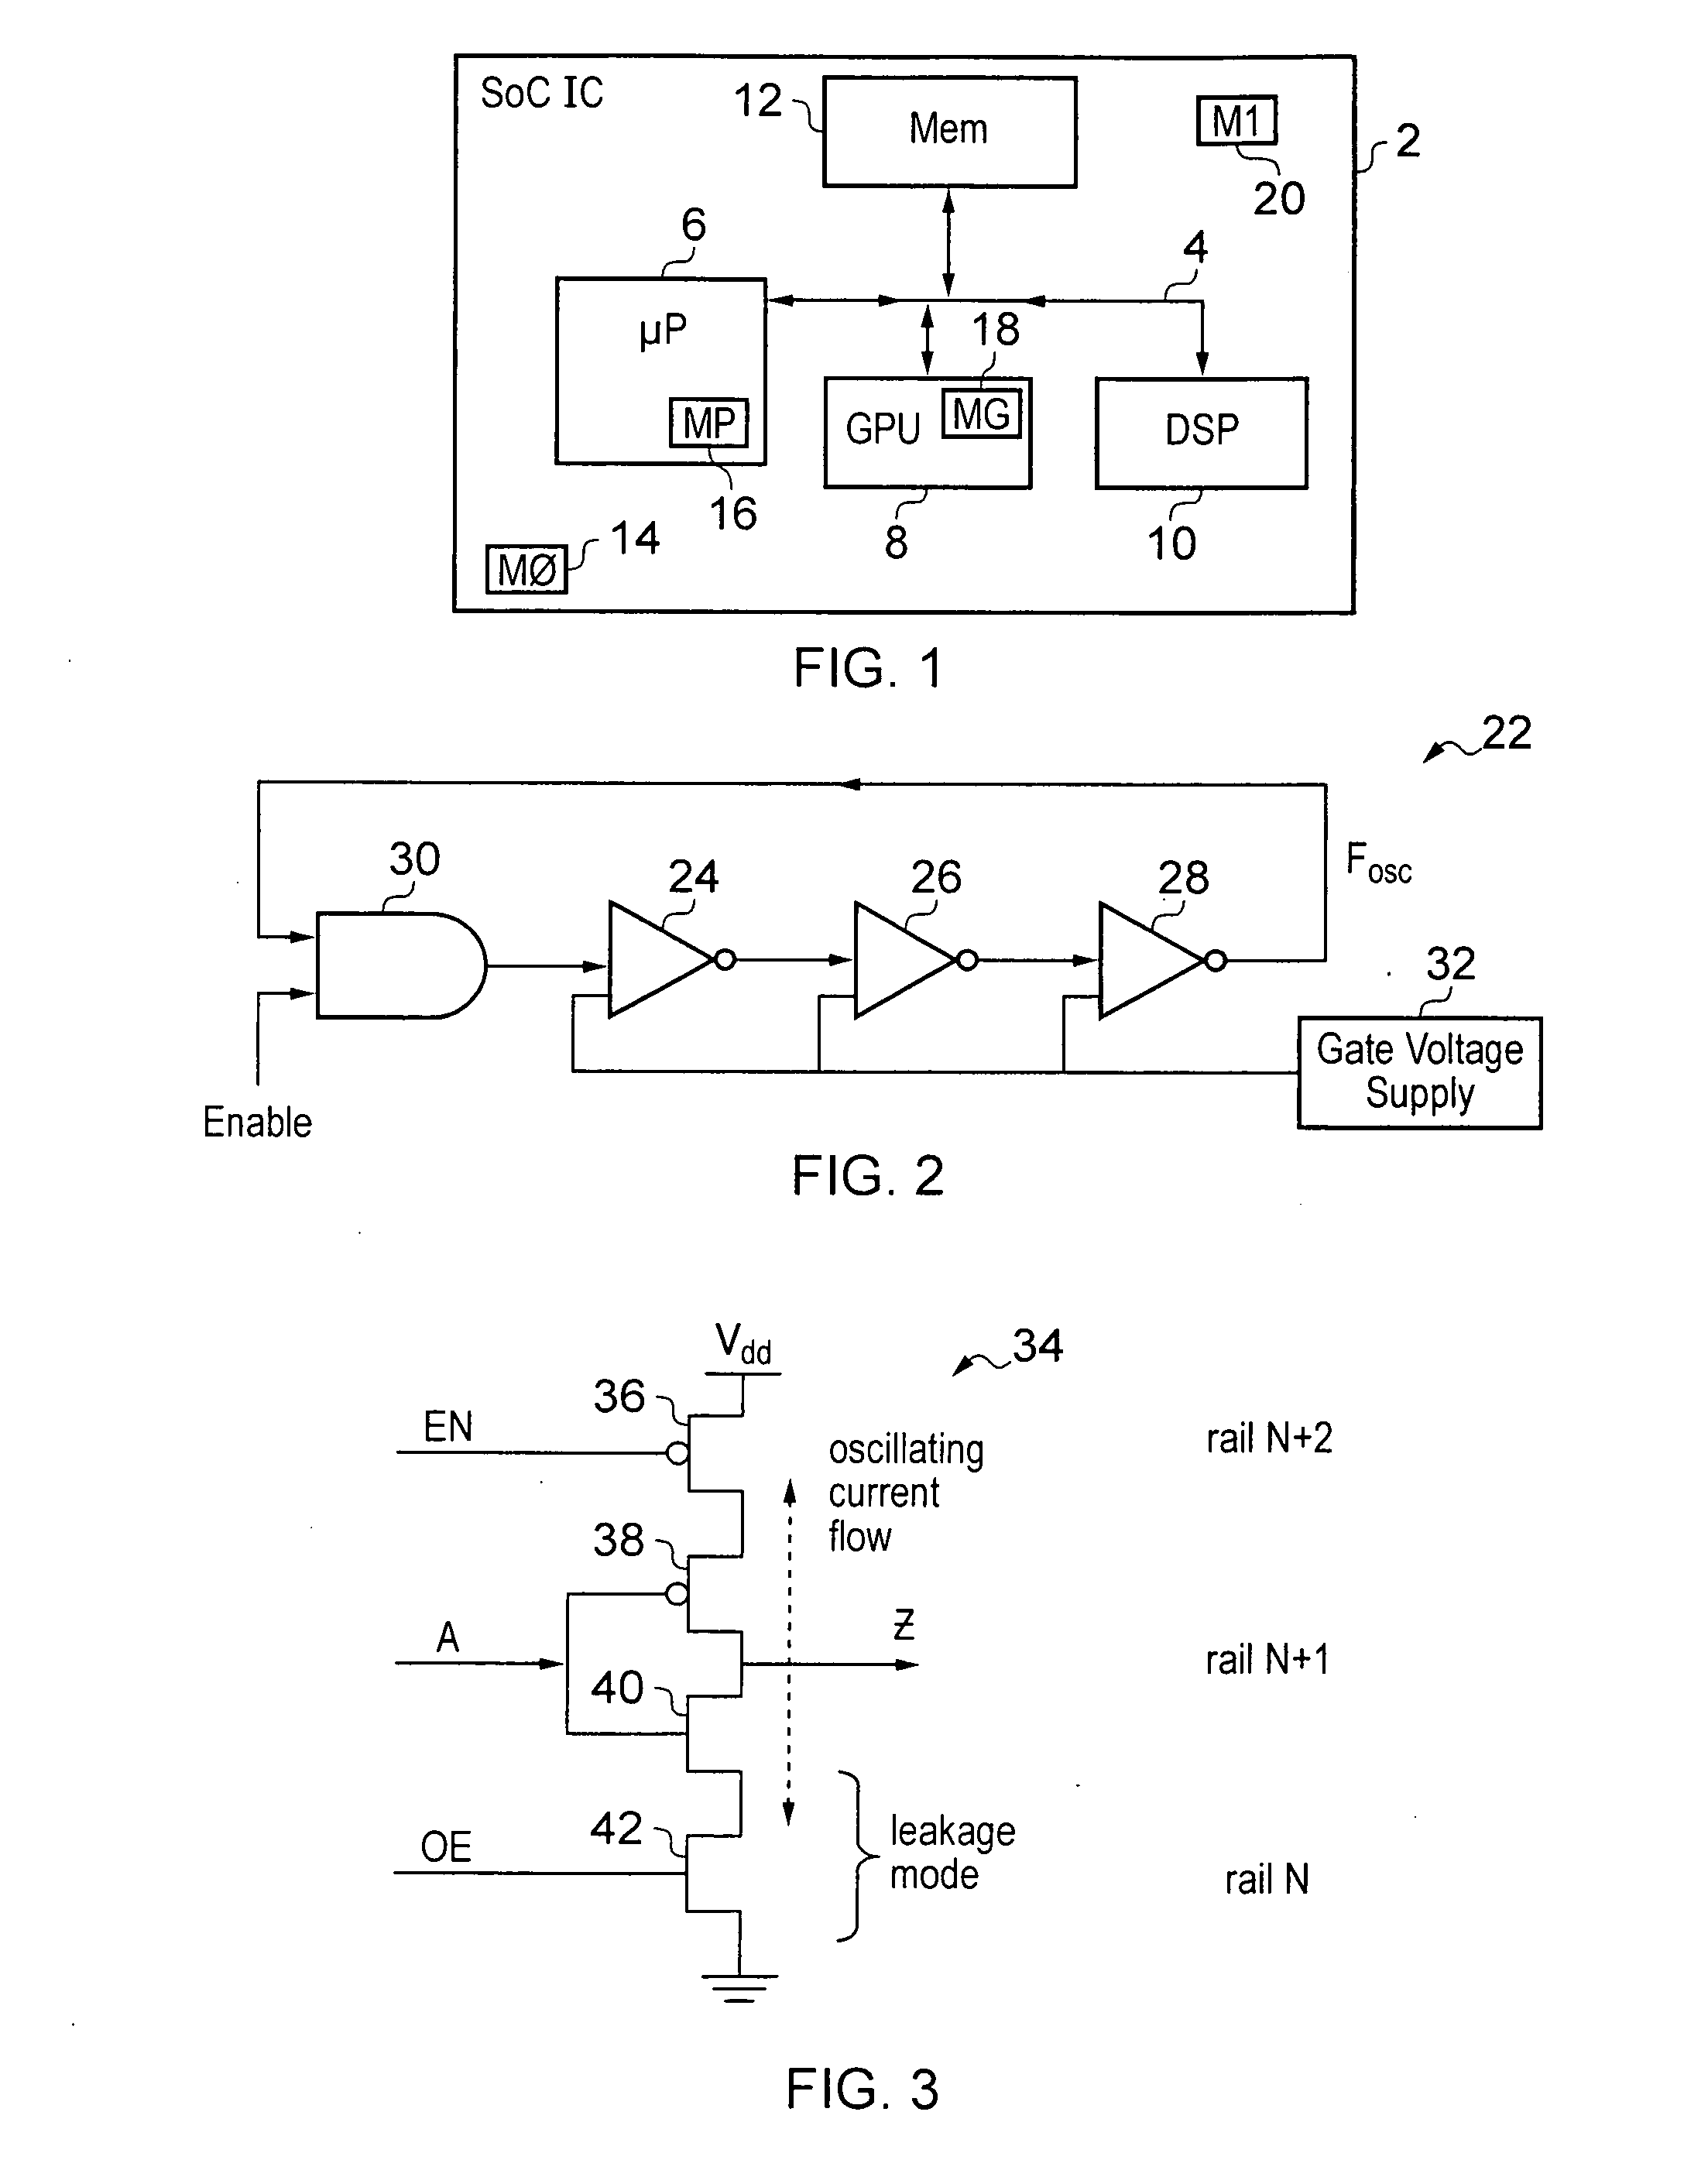 Operating parameter monitor for an integrated circuit